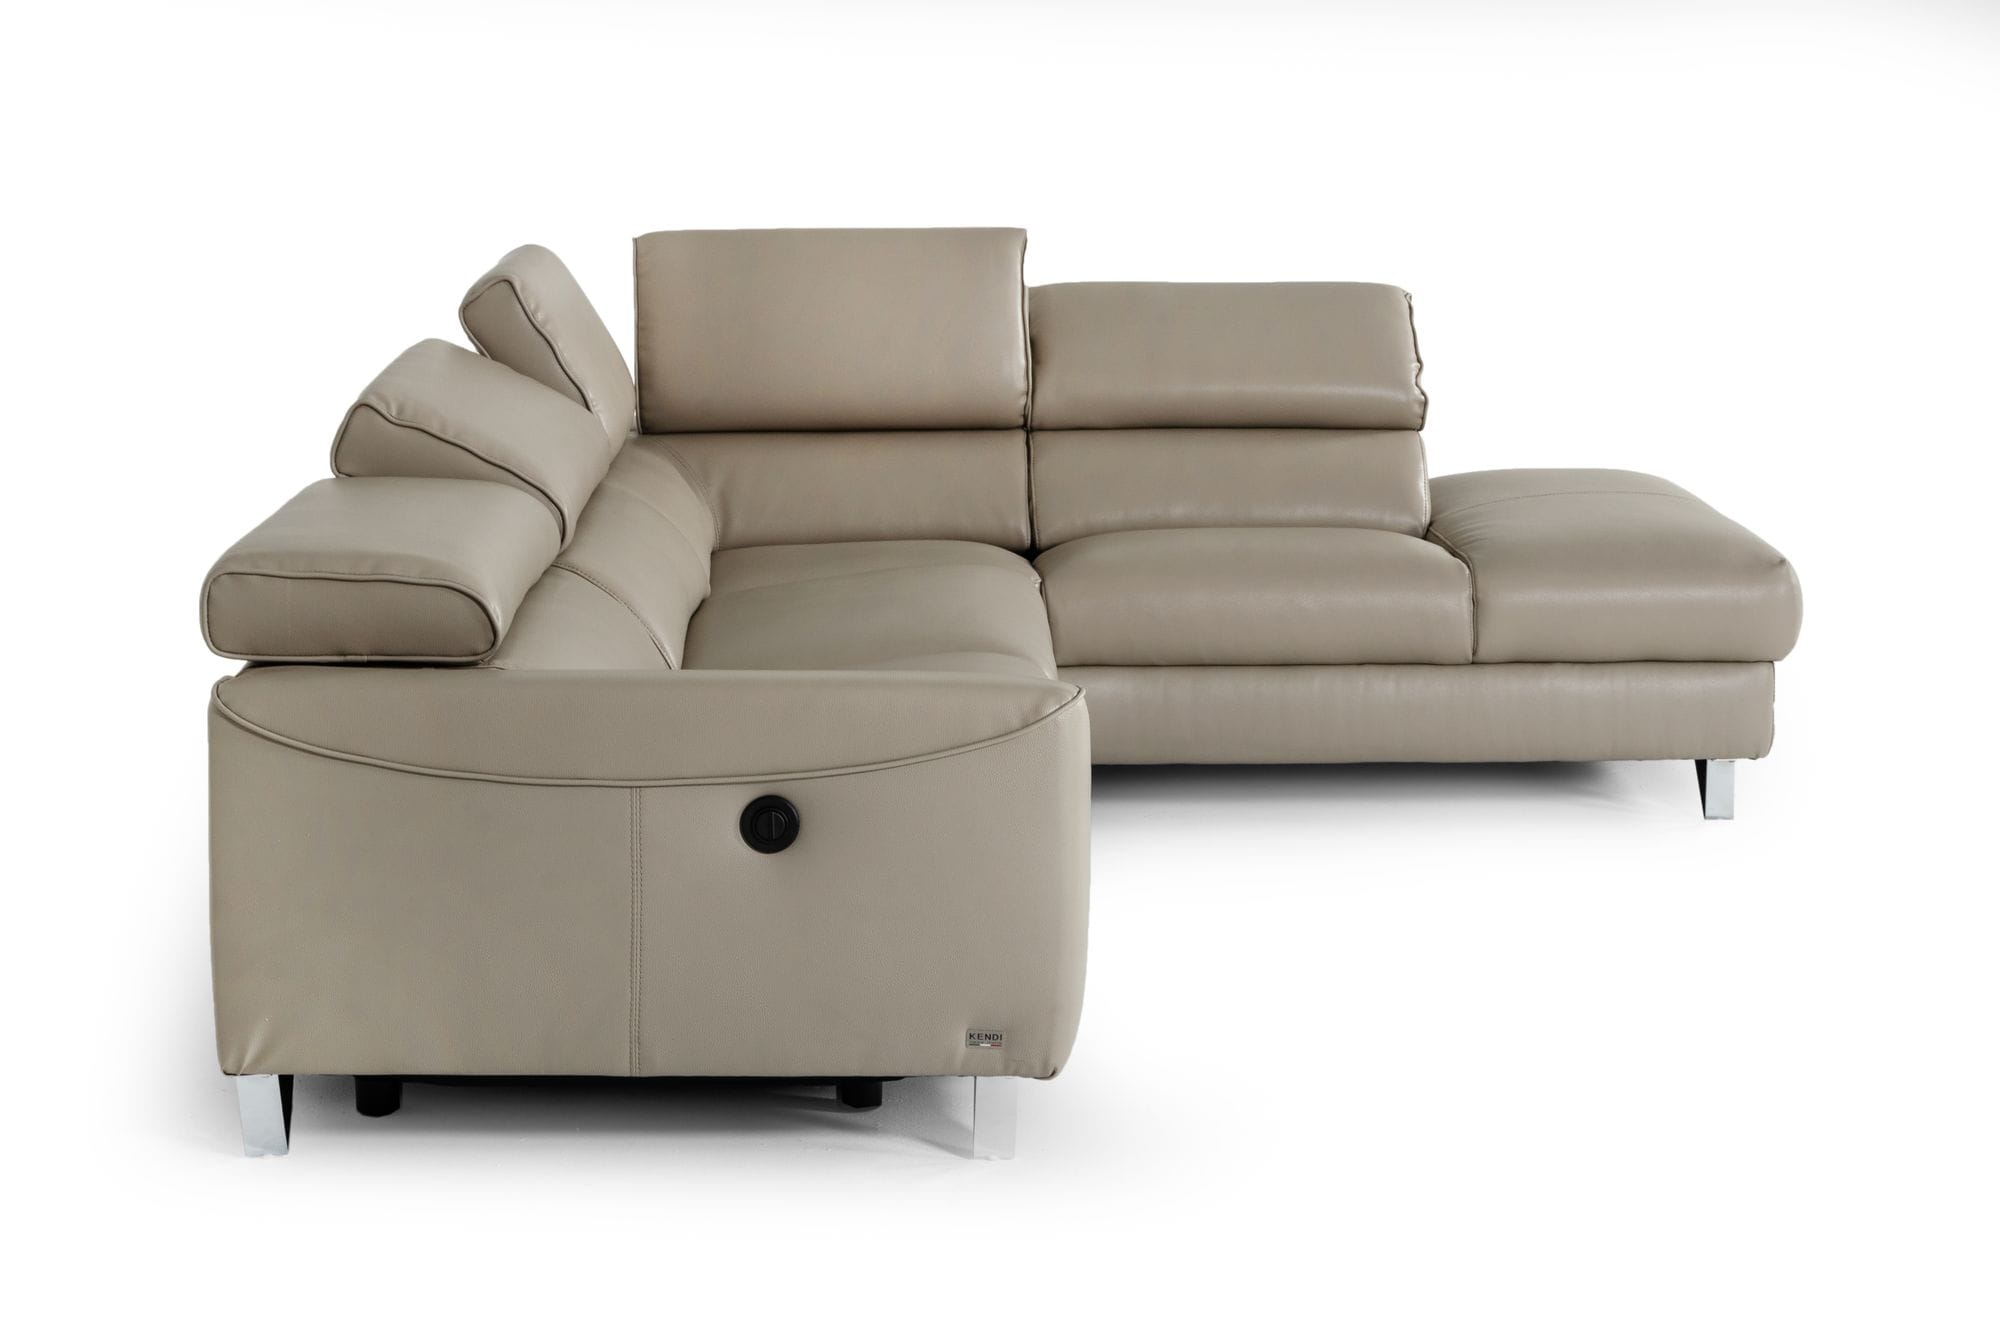 Divani Casa Versa - Modern Eco-Leather Right Facing Sectional Sofa with Recliner-Sectional Sofa-VIG-Wall2Wall Furnishings